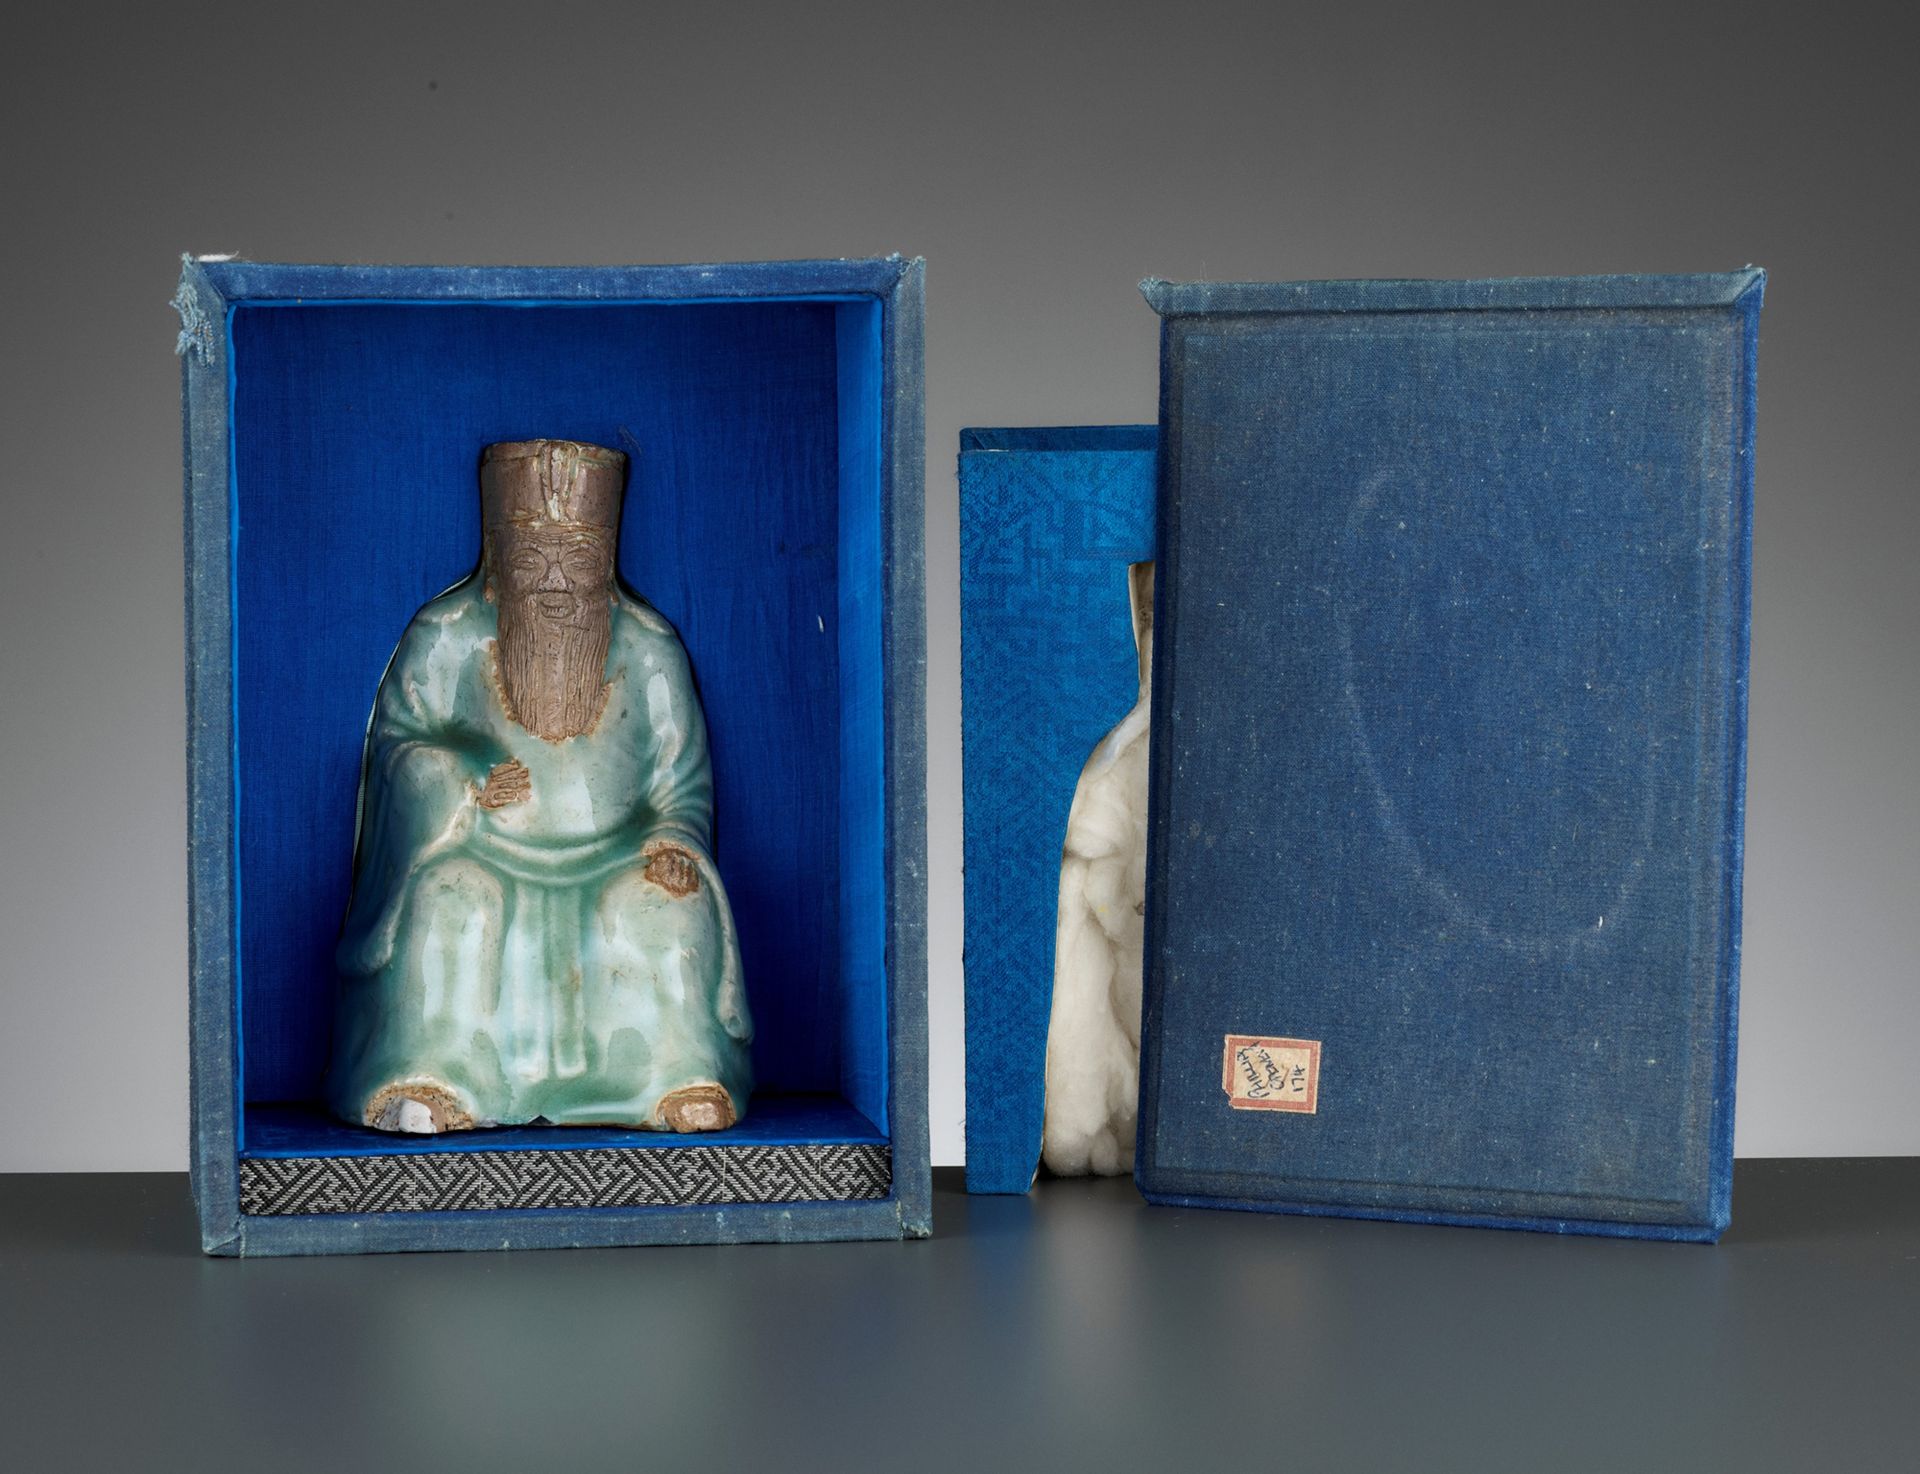 A LONGQUAN CELADON AND BISCUIT FIGURE OF AN IMMORTAL, MING DYNASTY 明代龙泉青铜器和璧人雕像
&hellip;